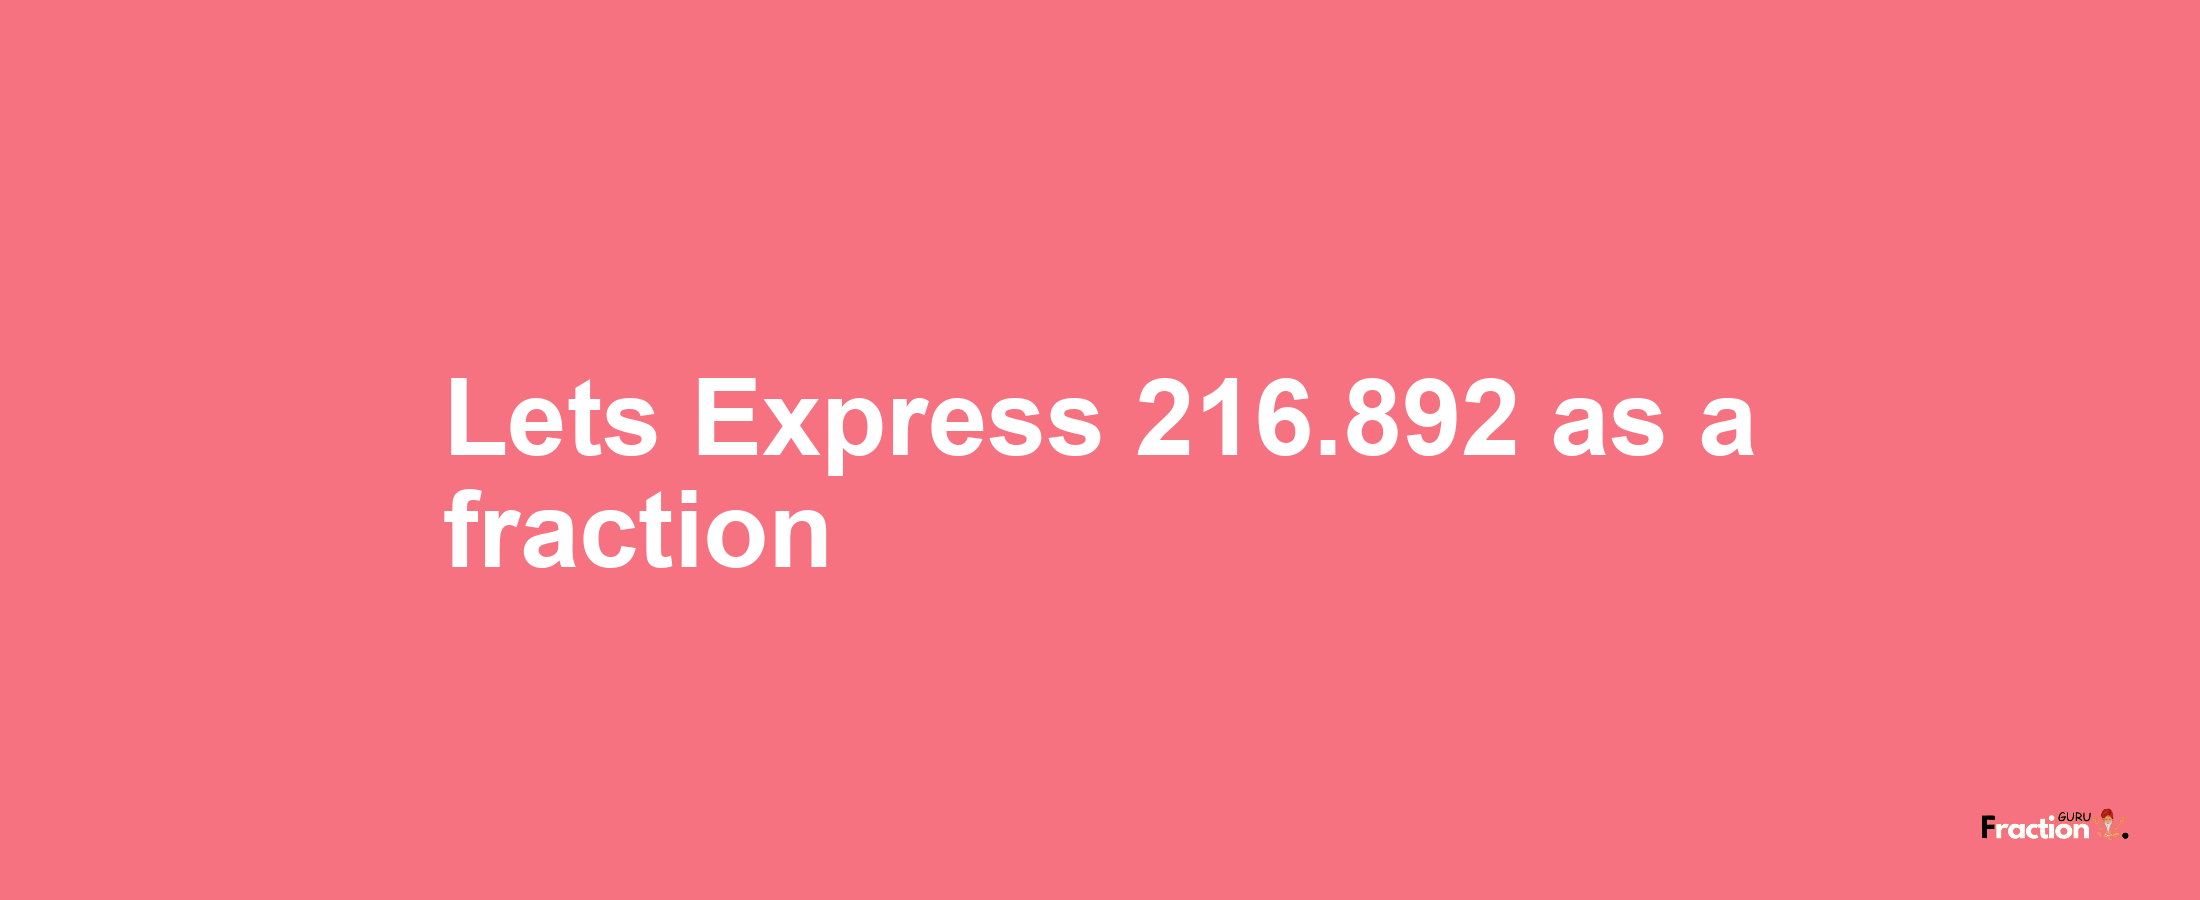 Lets Express 216.892 as afraction